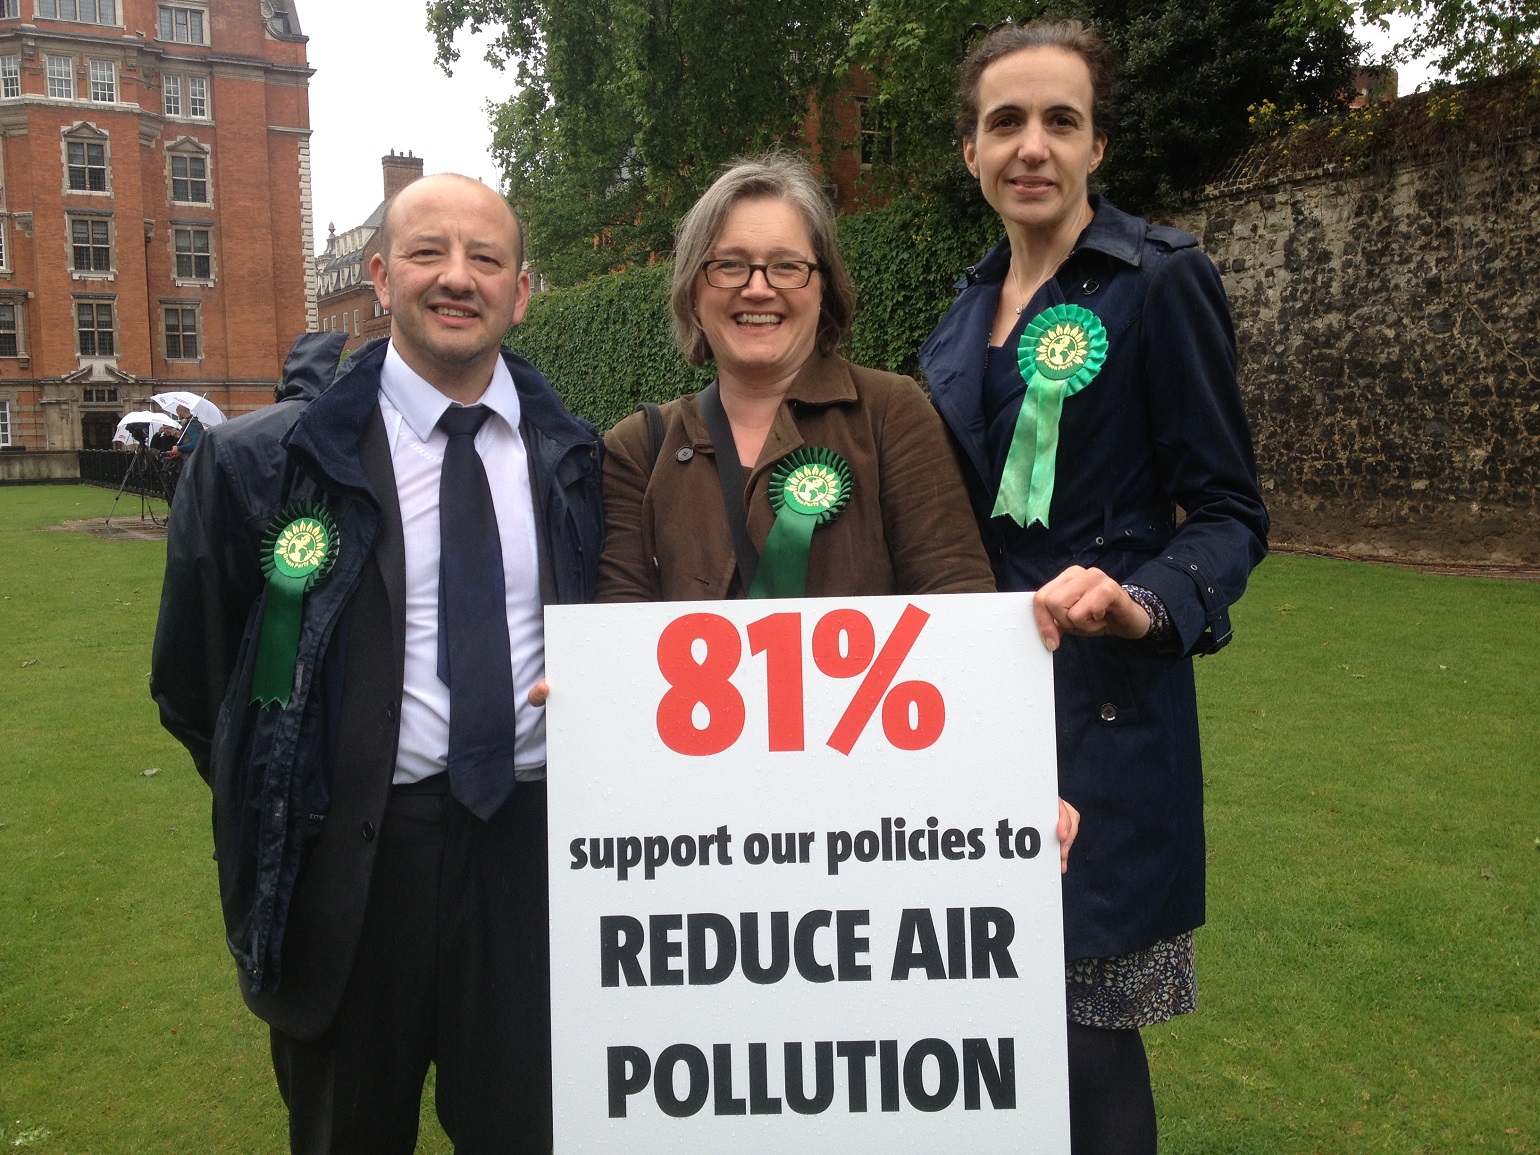 Charlie with Caroline Russell and Caroline Allen at the Green Party's GE 2015 campaign launch